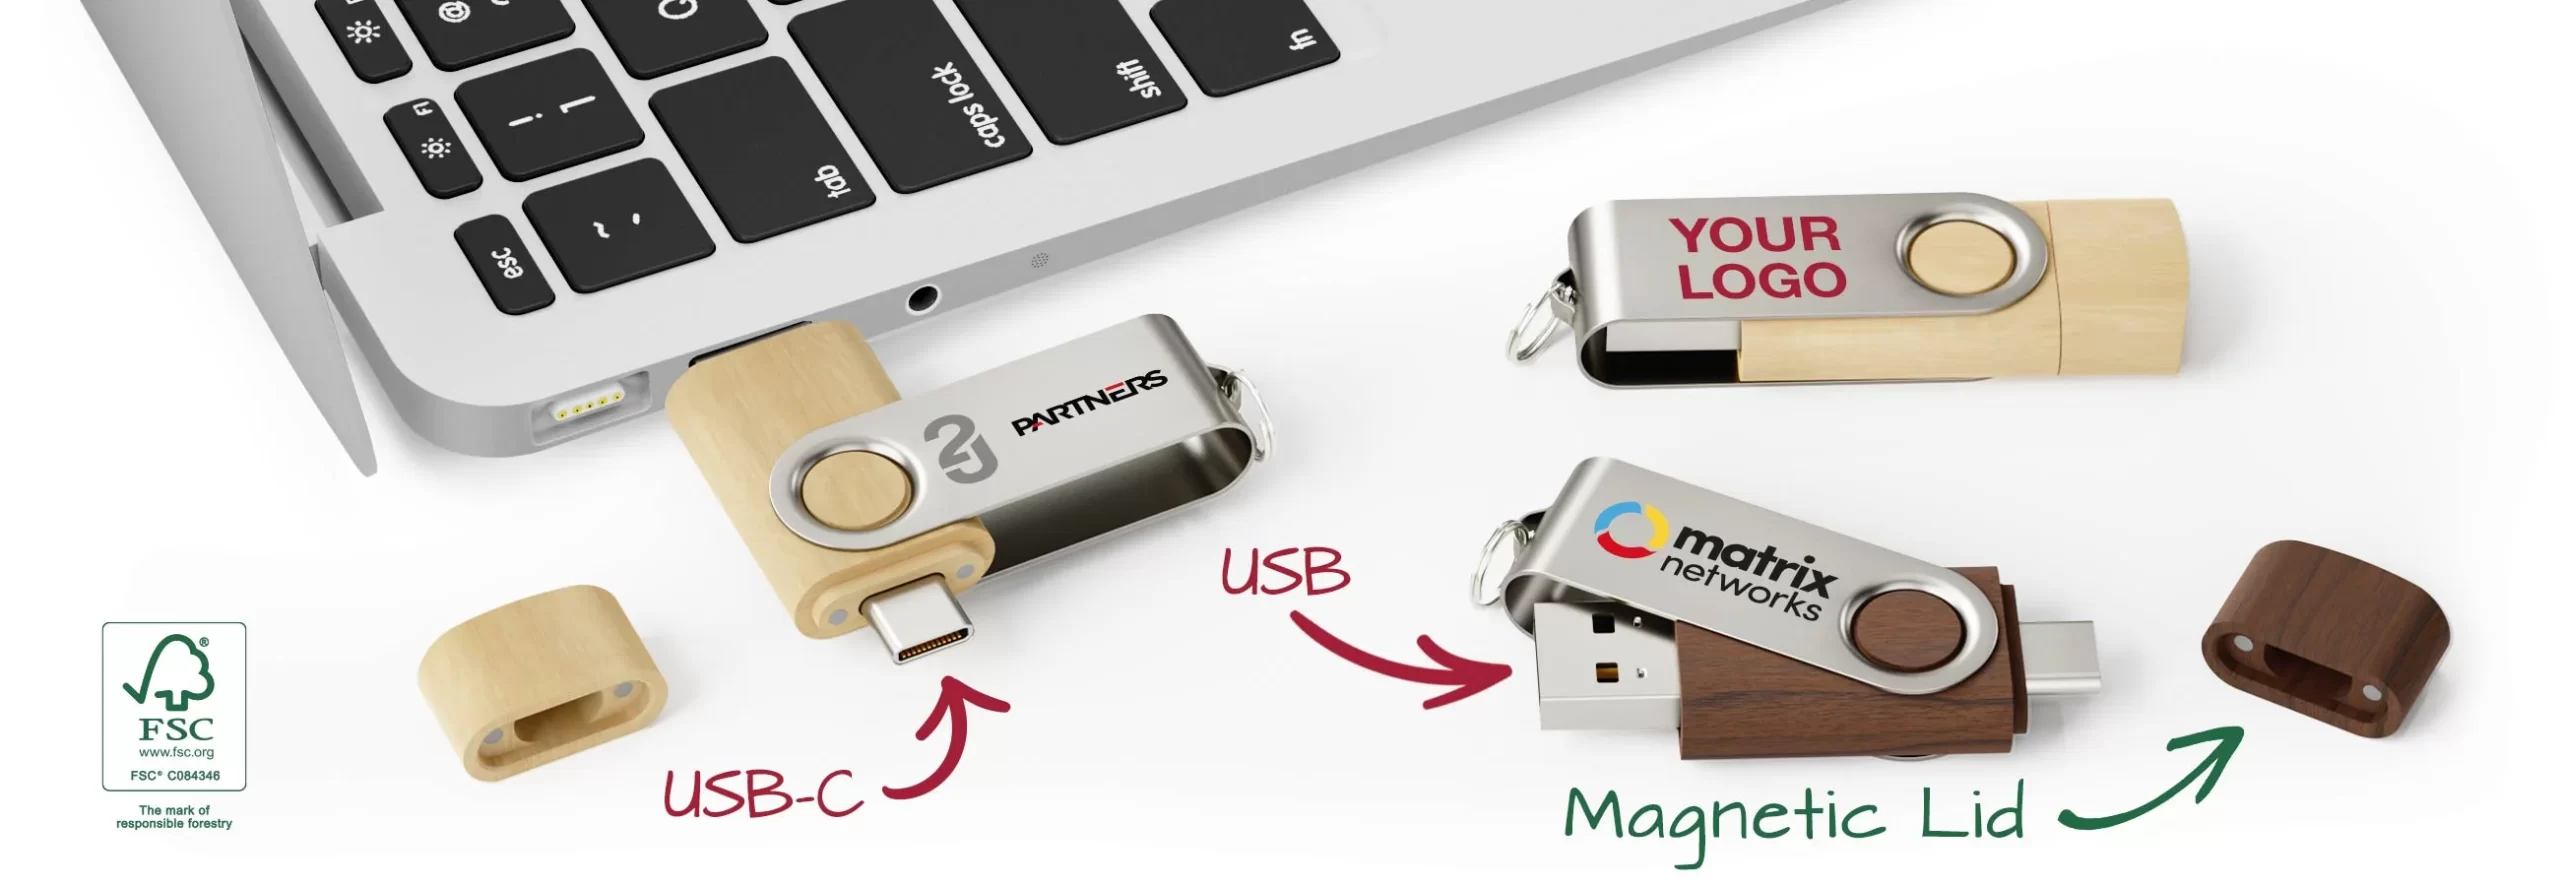 Rotating USB flash drive with Type-c